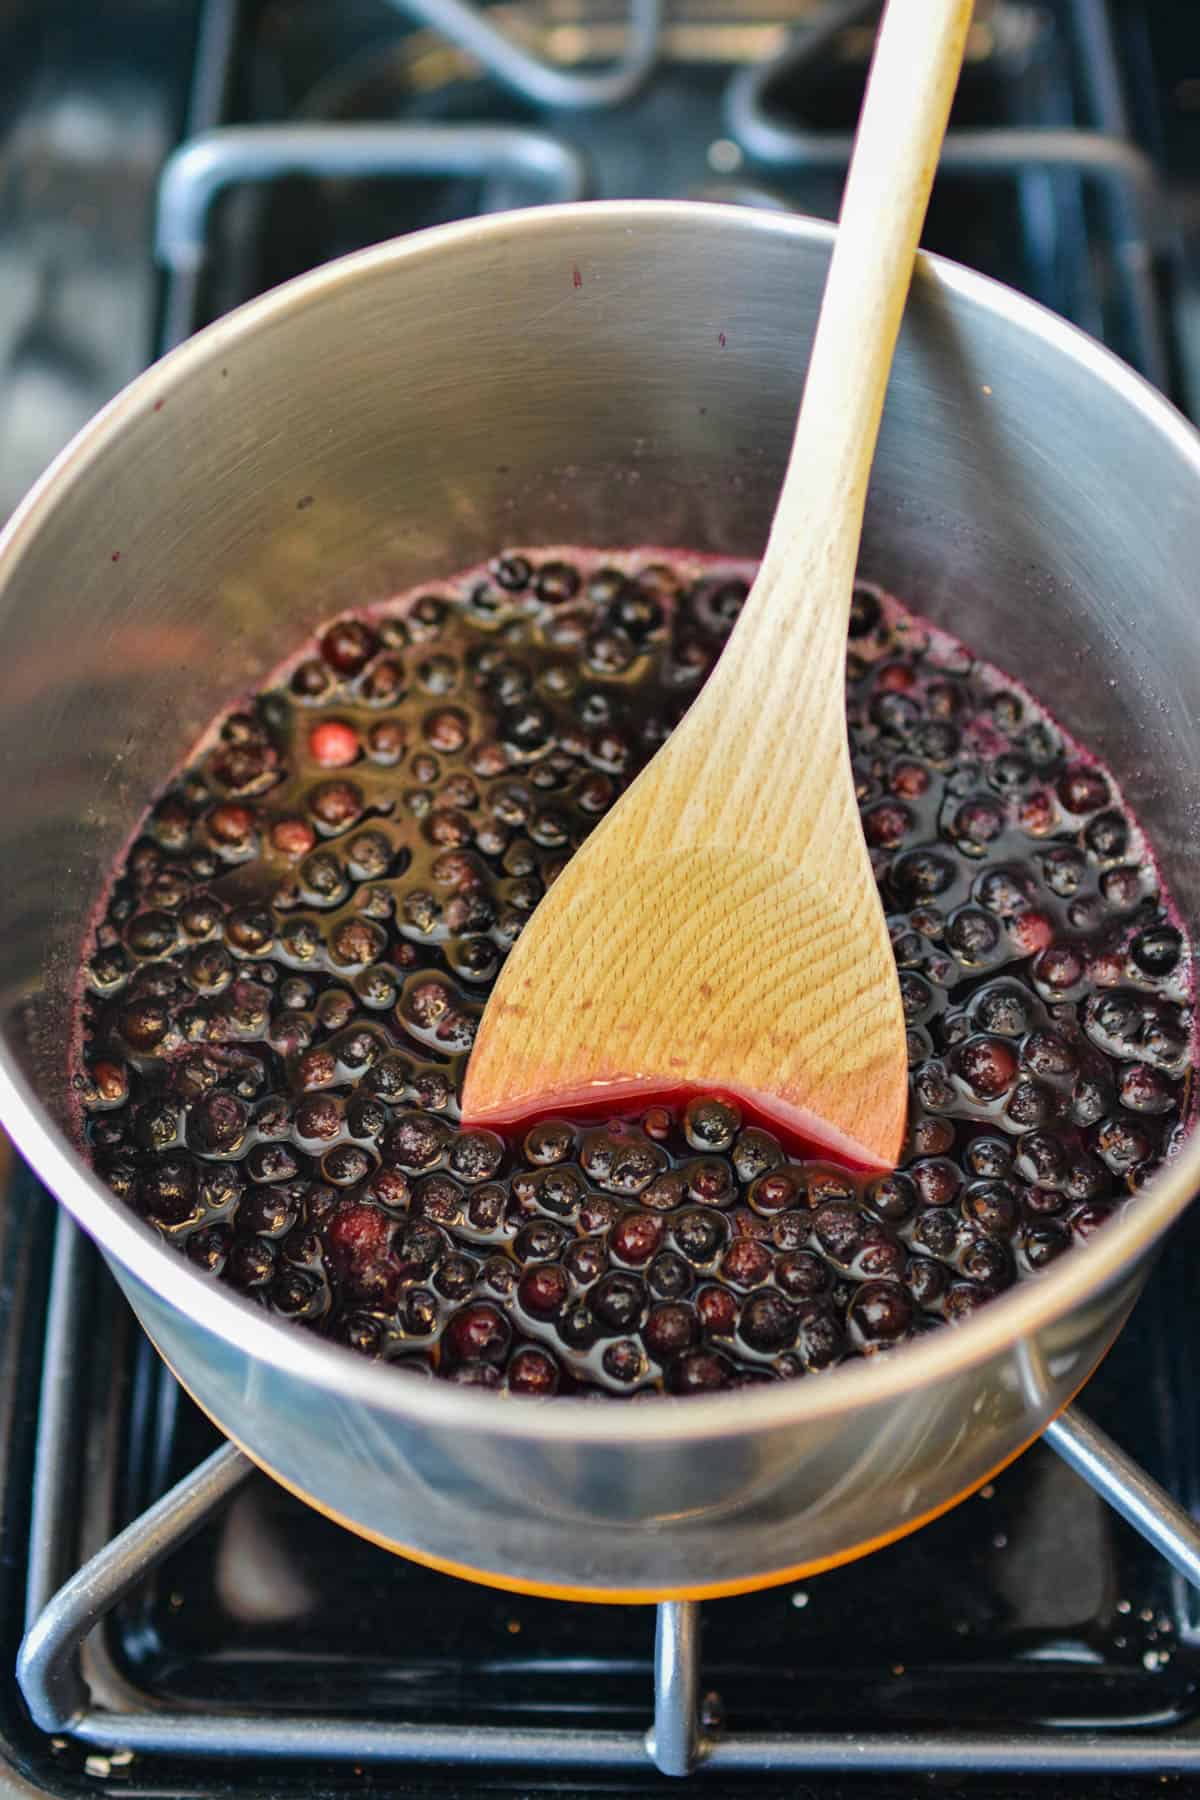 A saucepan full of blueberries cooking on the stove to make blueberry simple syrup.